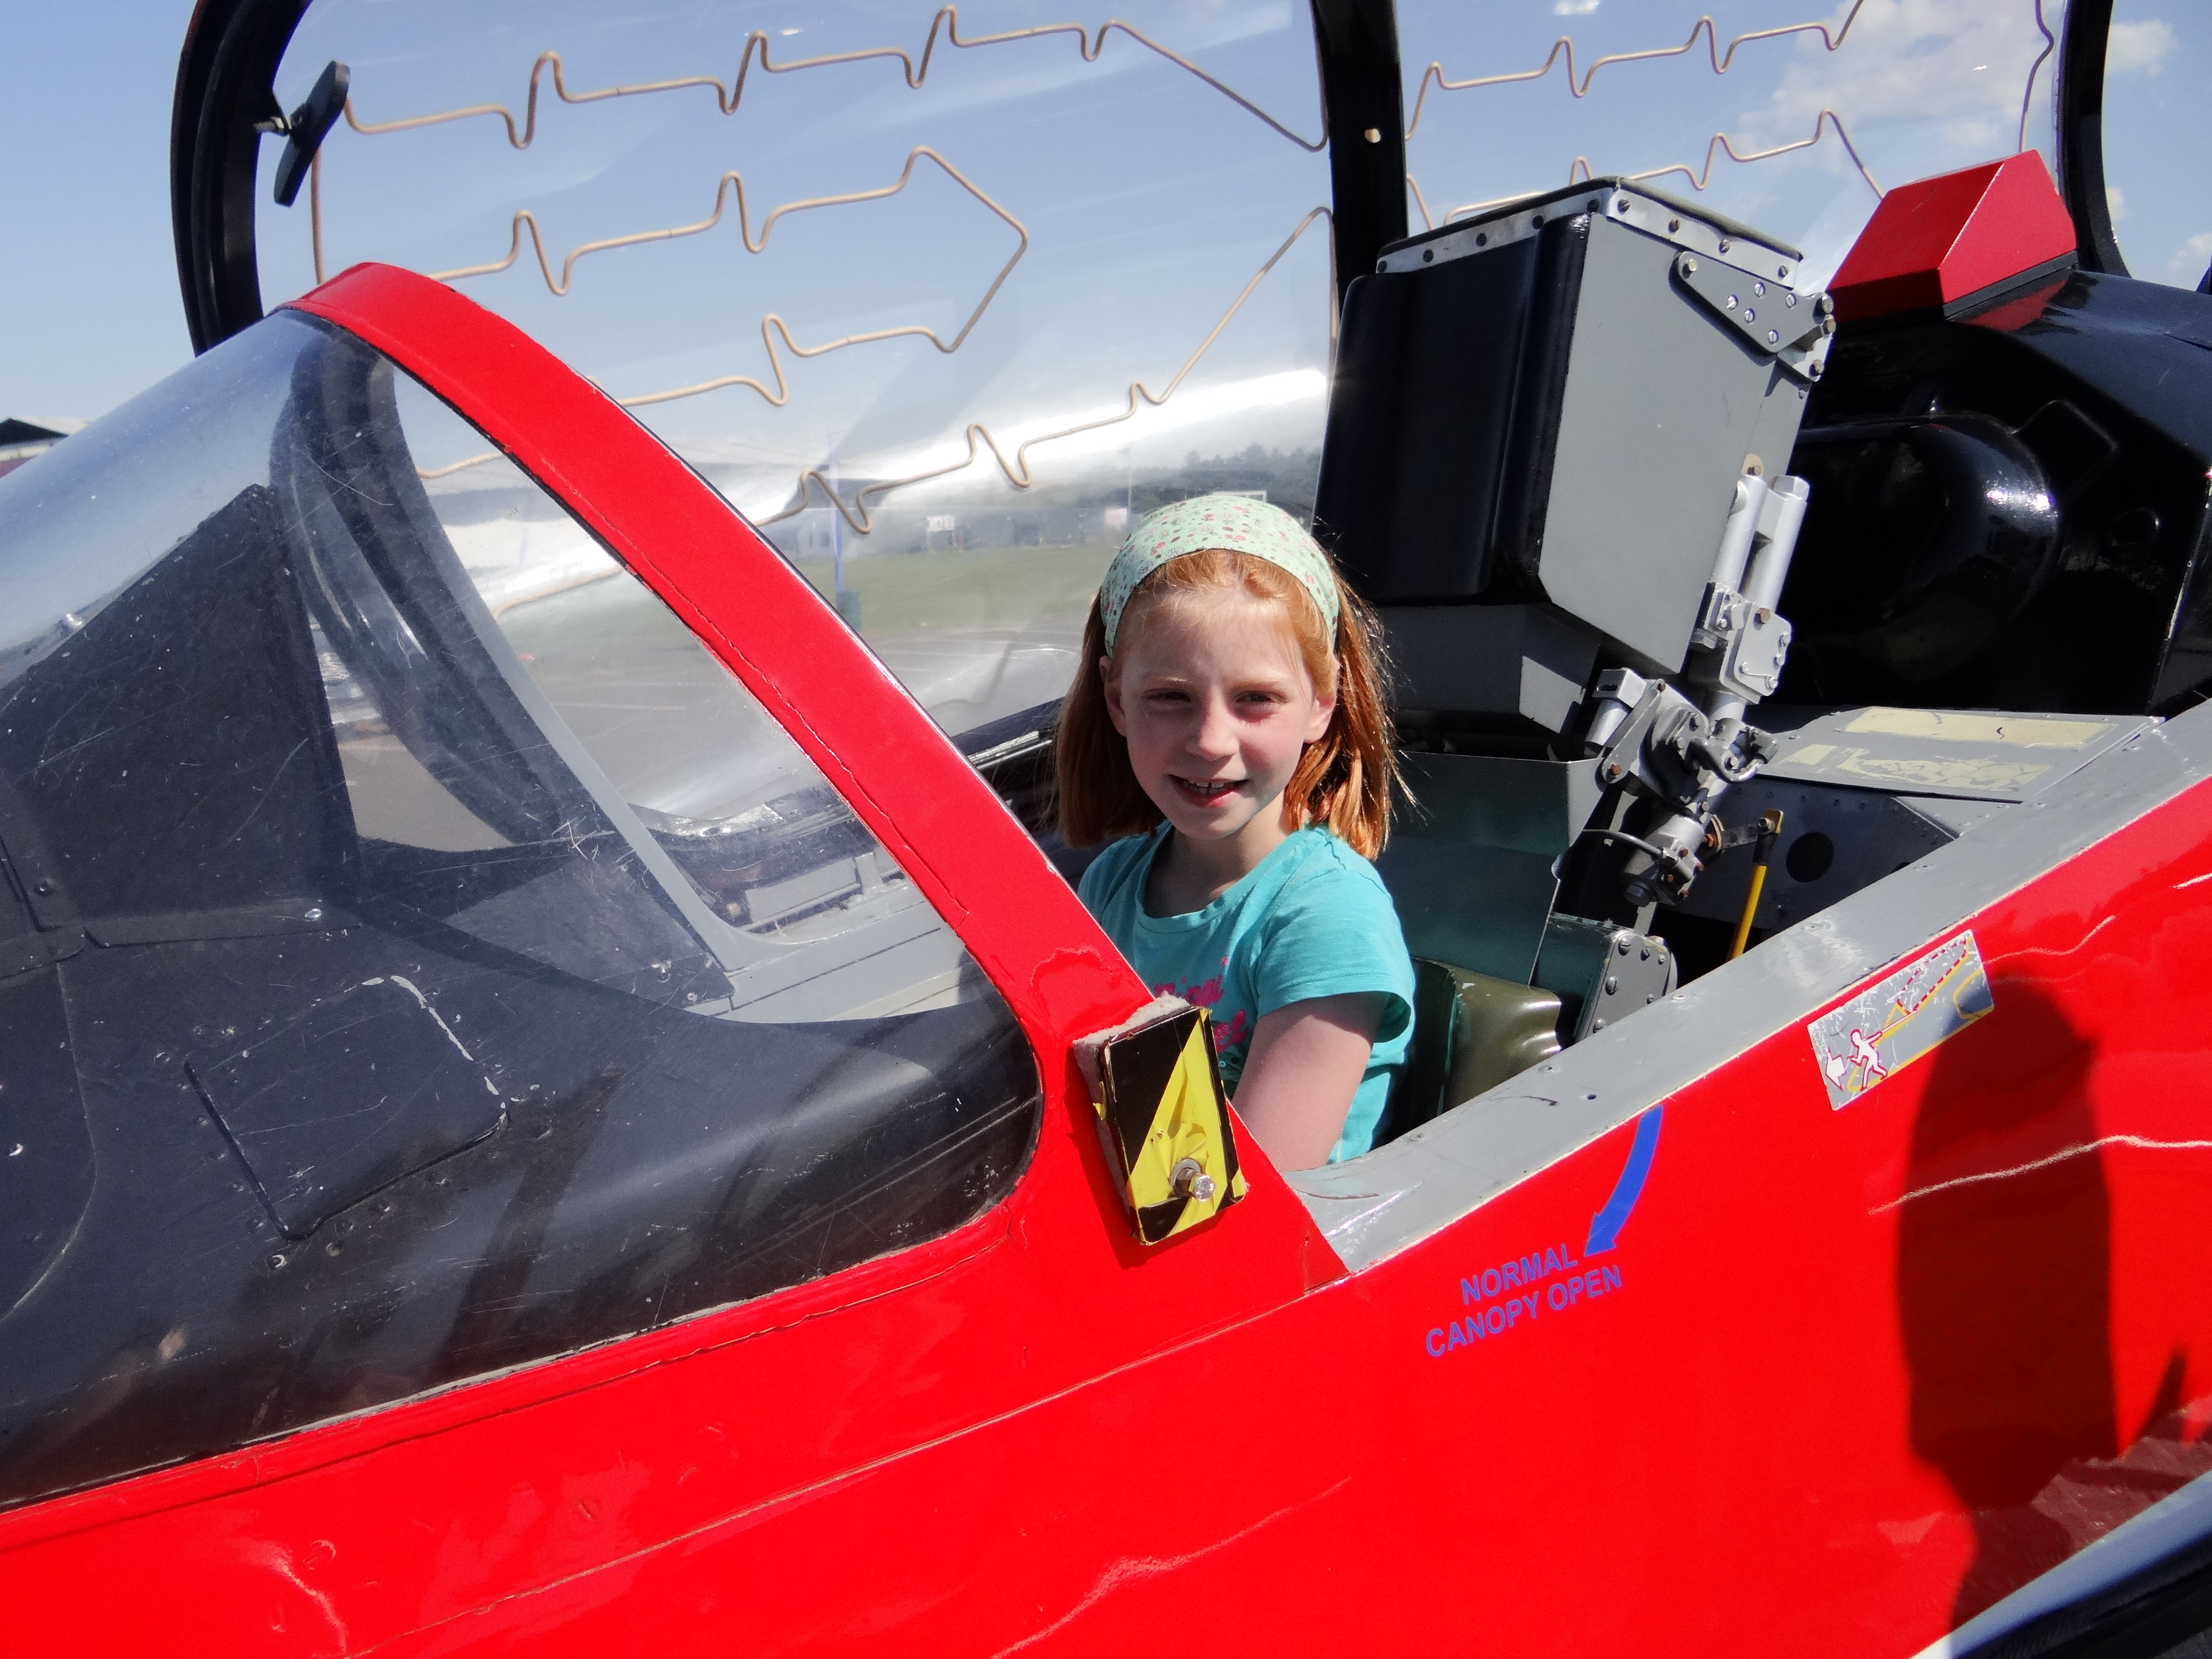 Trying out the RAF Red Arrows Hawkjet at Scotland's National Airshow on 26 July 2014.